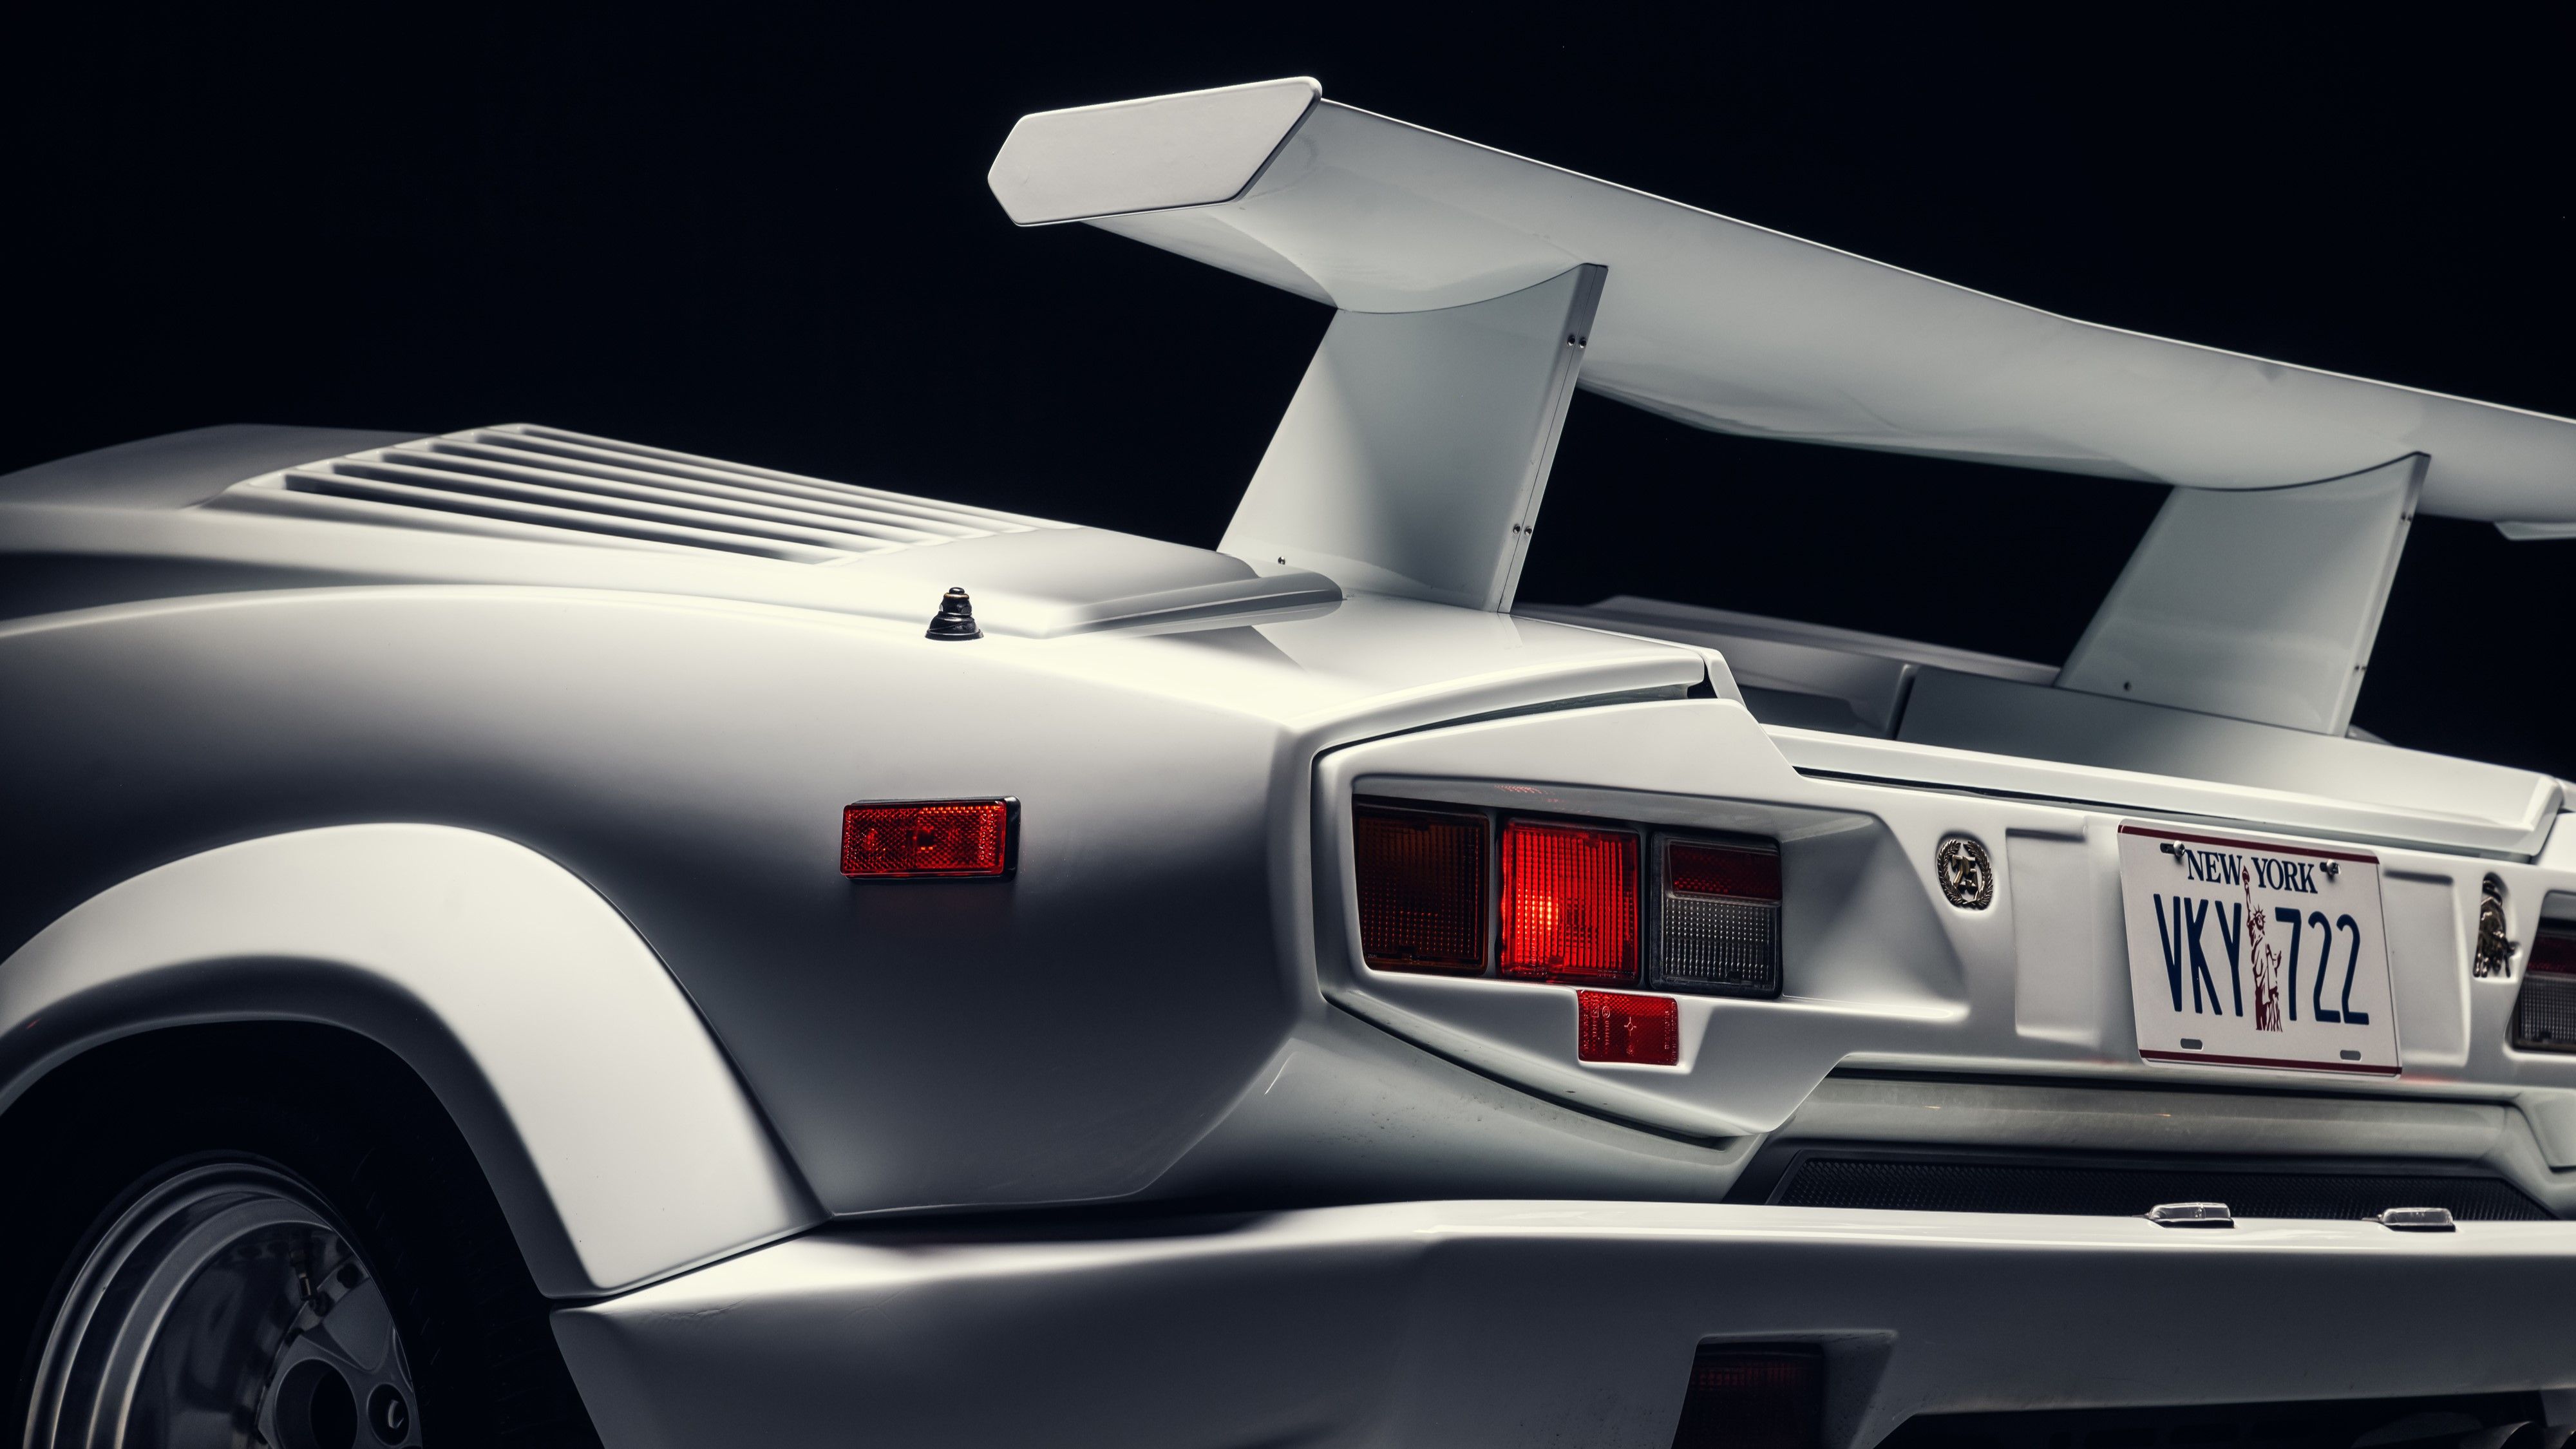 General 4000x2250 Lamborghini Countach Countach 25th Anniversary white cars photography car rear view vehicle licence plates simple background italian cars Volkswagen Group